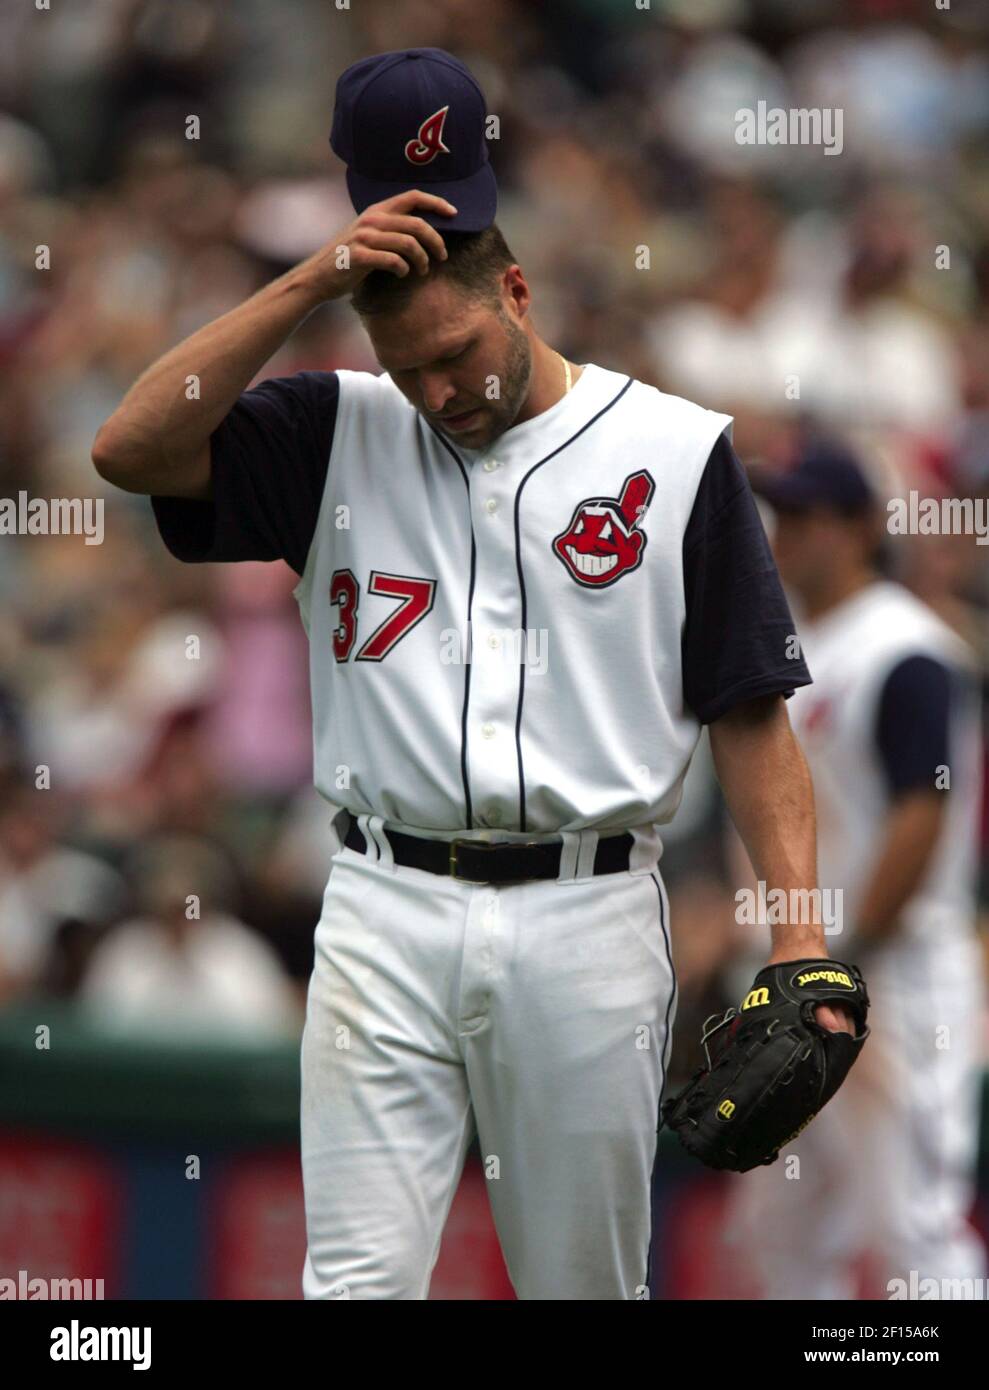 Cleveland Indians pitcher Jake Westbrook reacts after giving up a two-run  home run to the New York Yankees Jason Giambi in the fourth inning. The  Yankees defeated the Indians, 5-3 at Jacob's